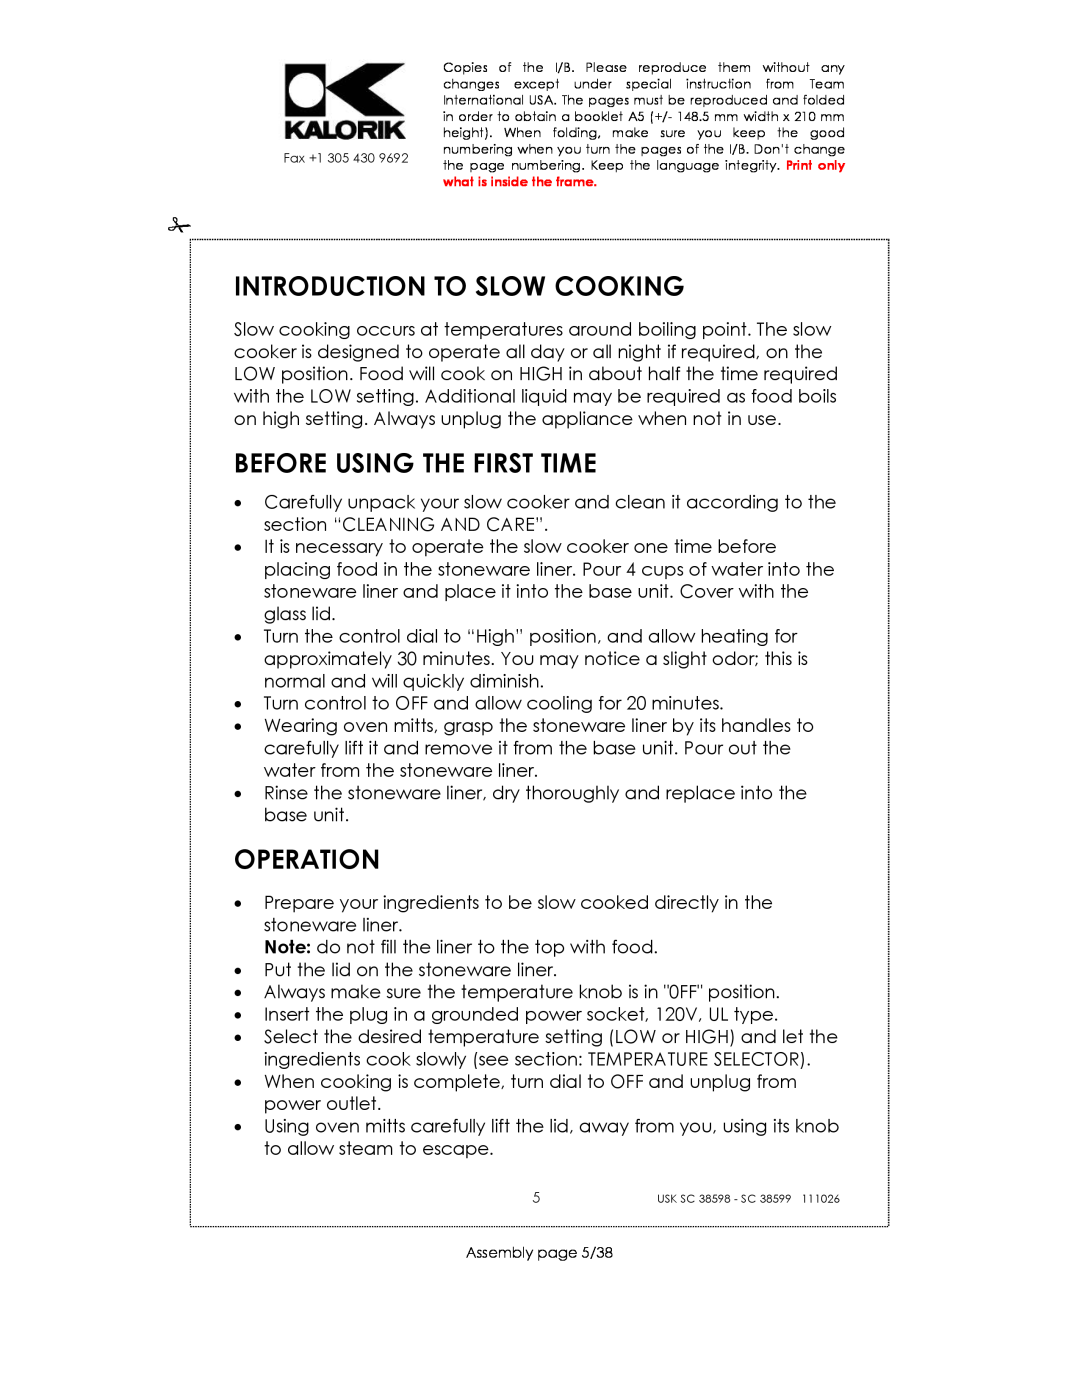 Kalorik 38599, usk sc 38598 manual Introduction To Slow Cooking, Before Using The First Time, Operation 